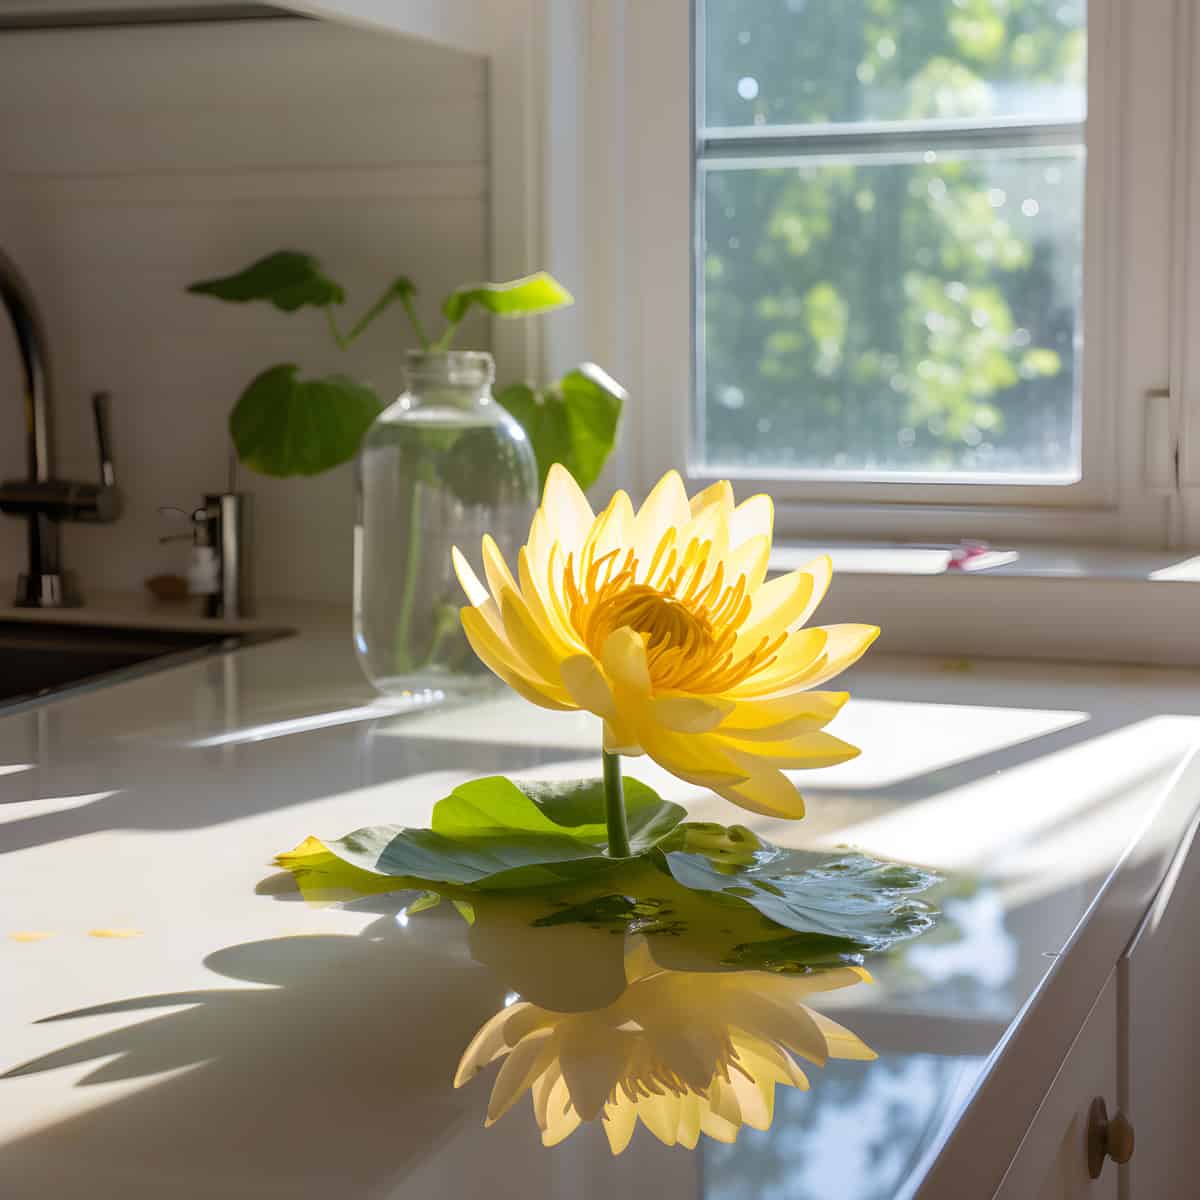 Yellow Pond Lily on a kitchen counter